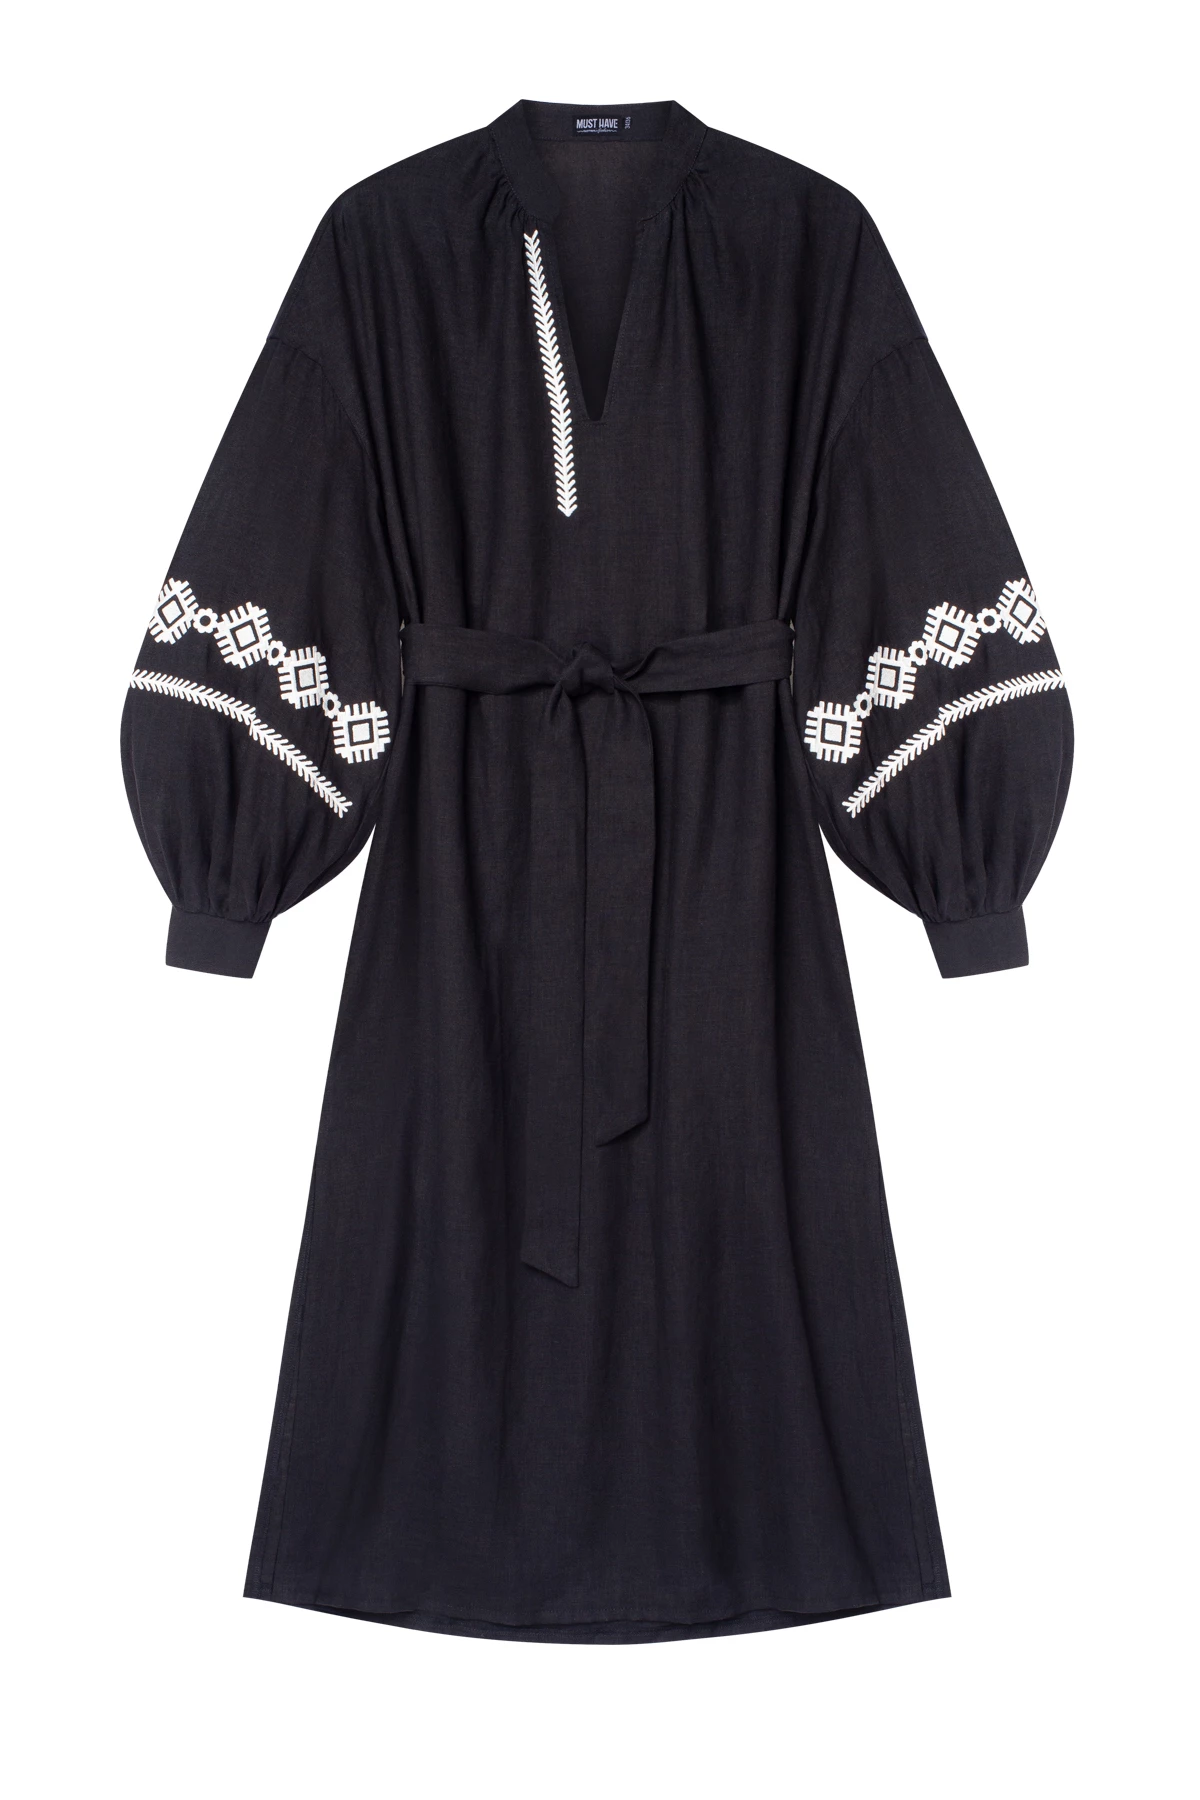 Black linen vyshyvanka dress with floral embroidery, photo 7